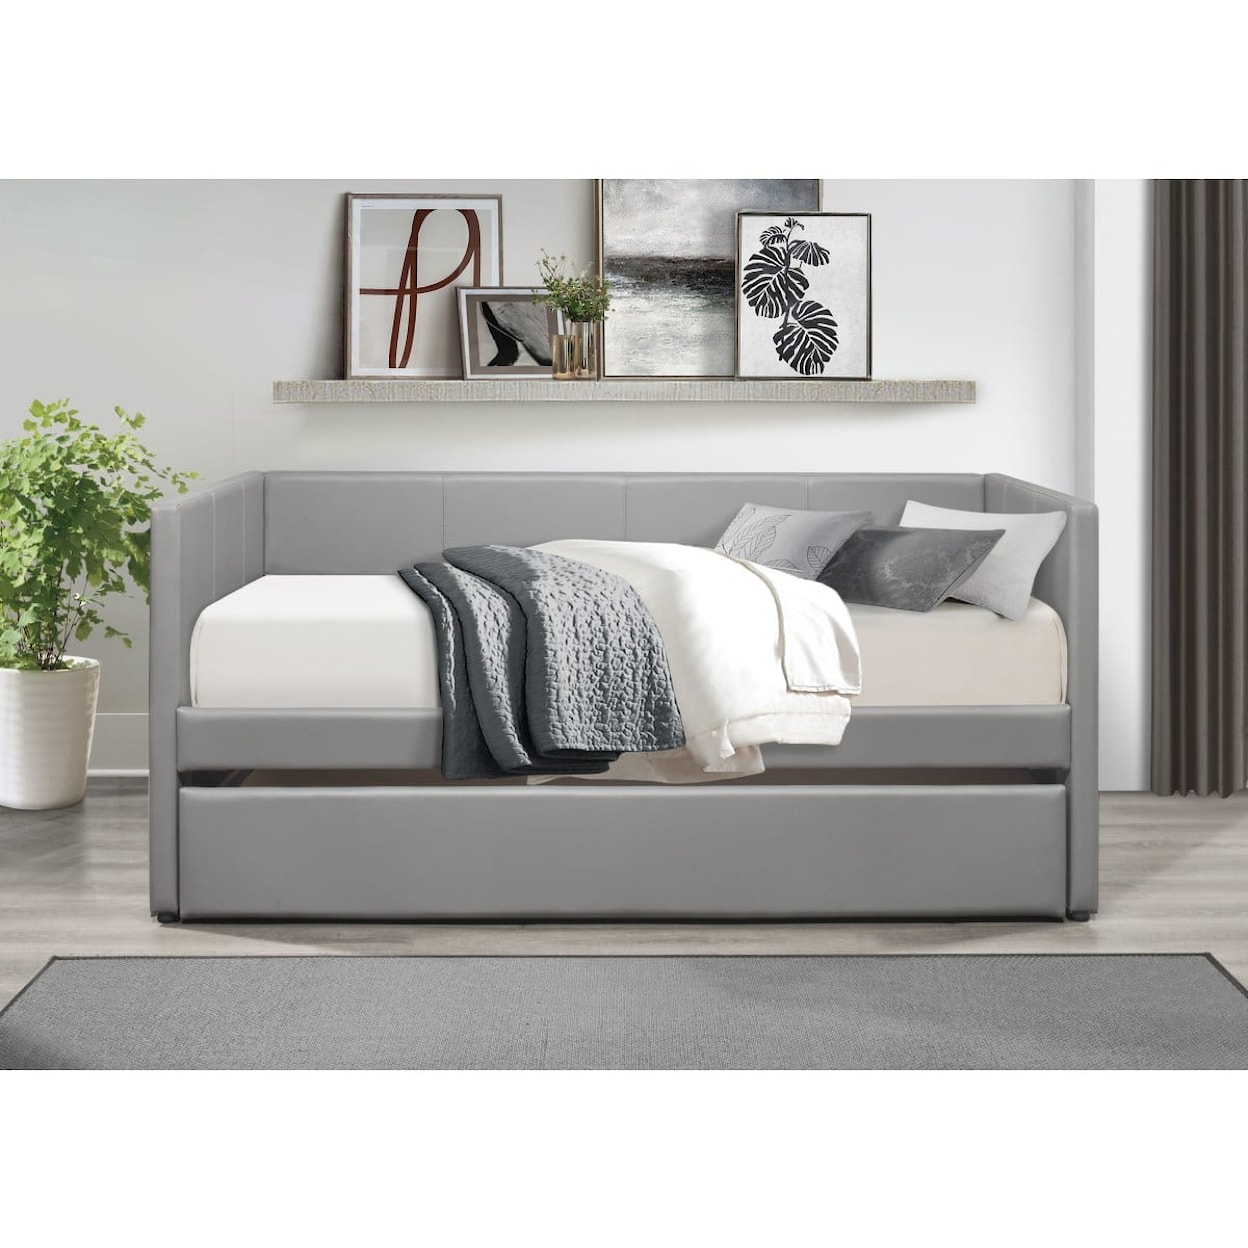 Homelegance Adra Daybed with Trundle